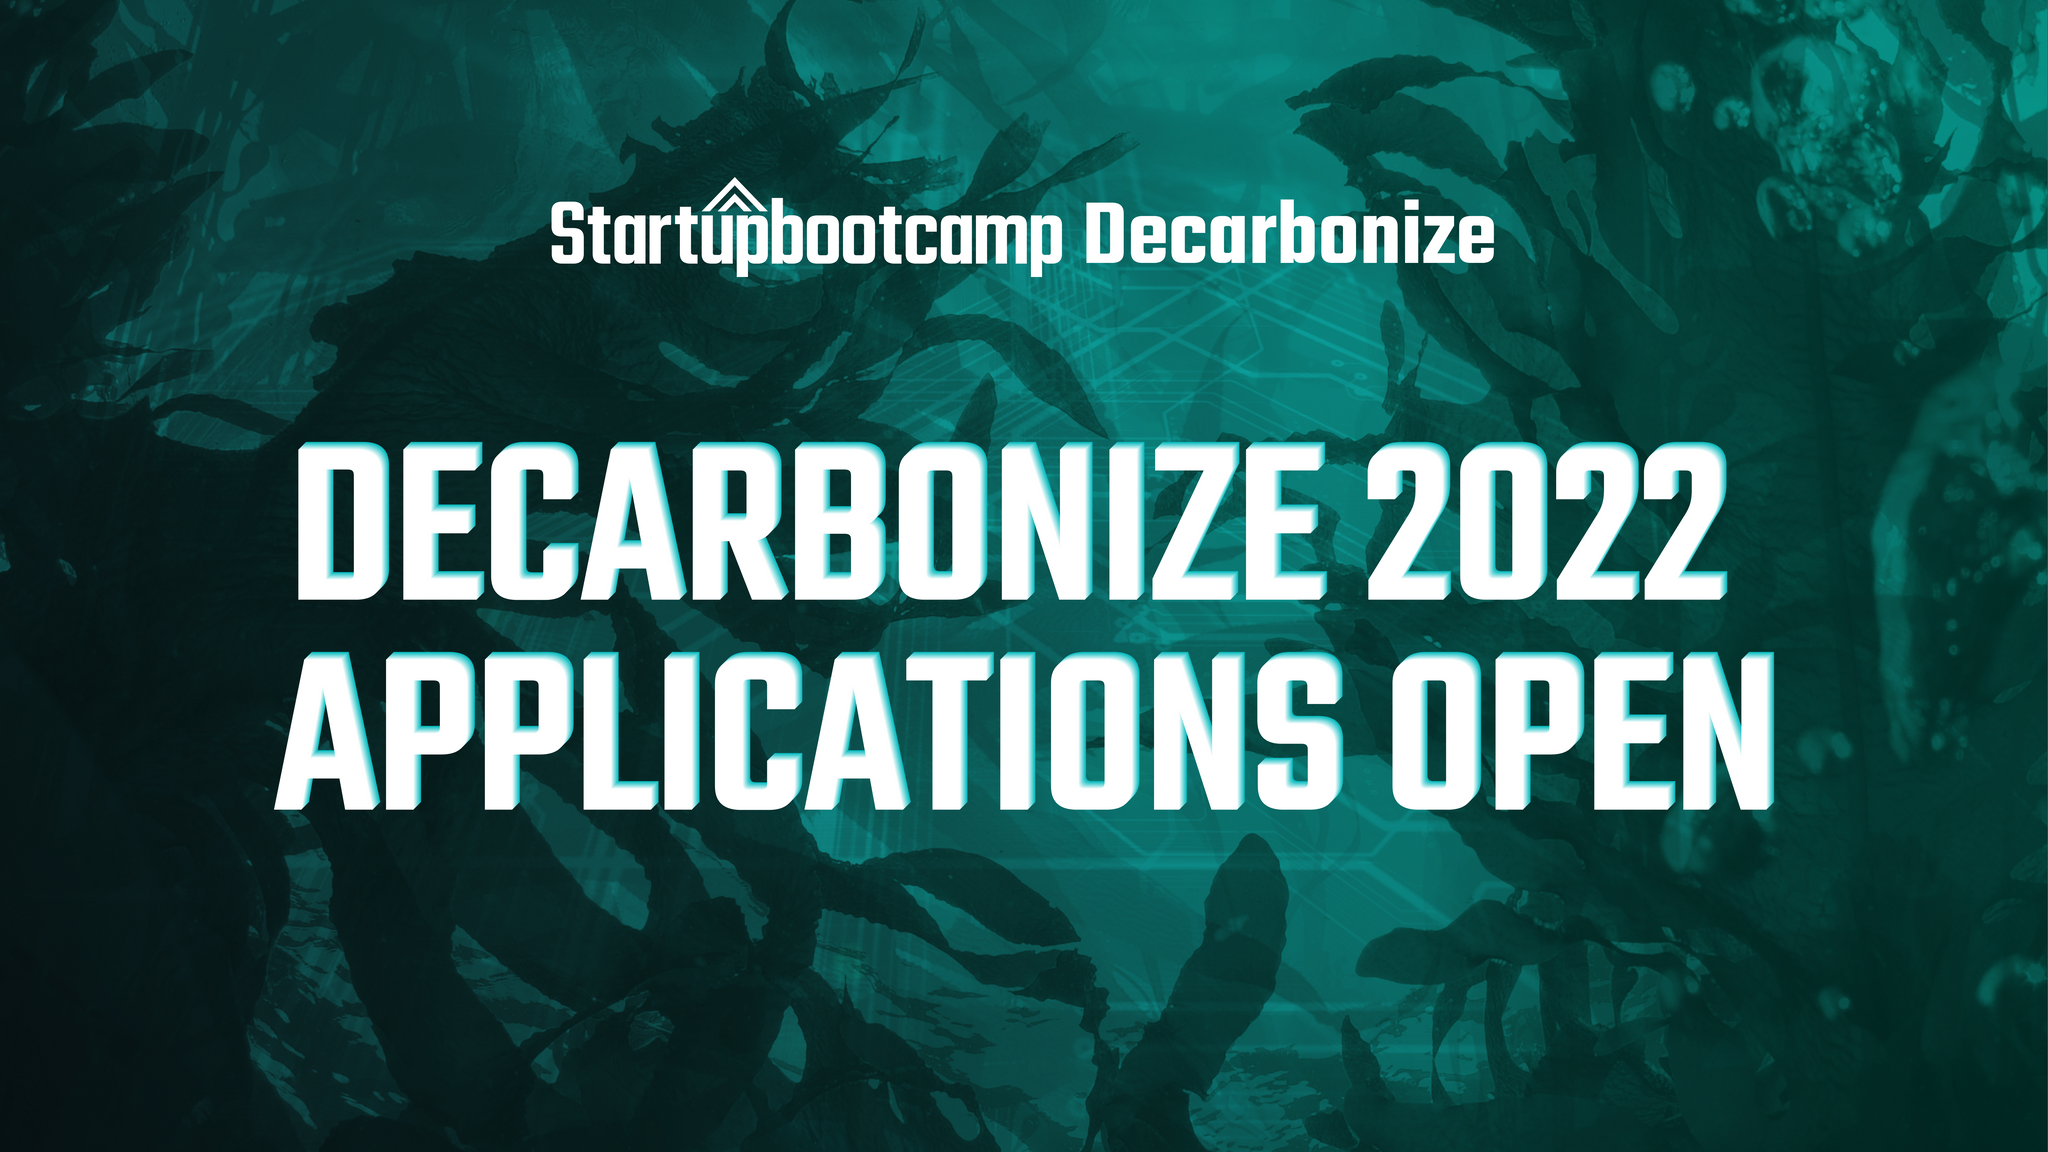 Startupbootcamp’s Decarbonize accelerator program applications are open